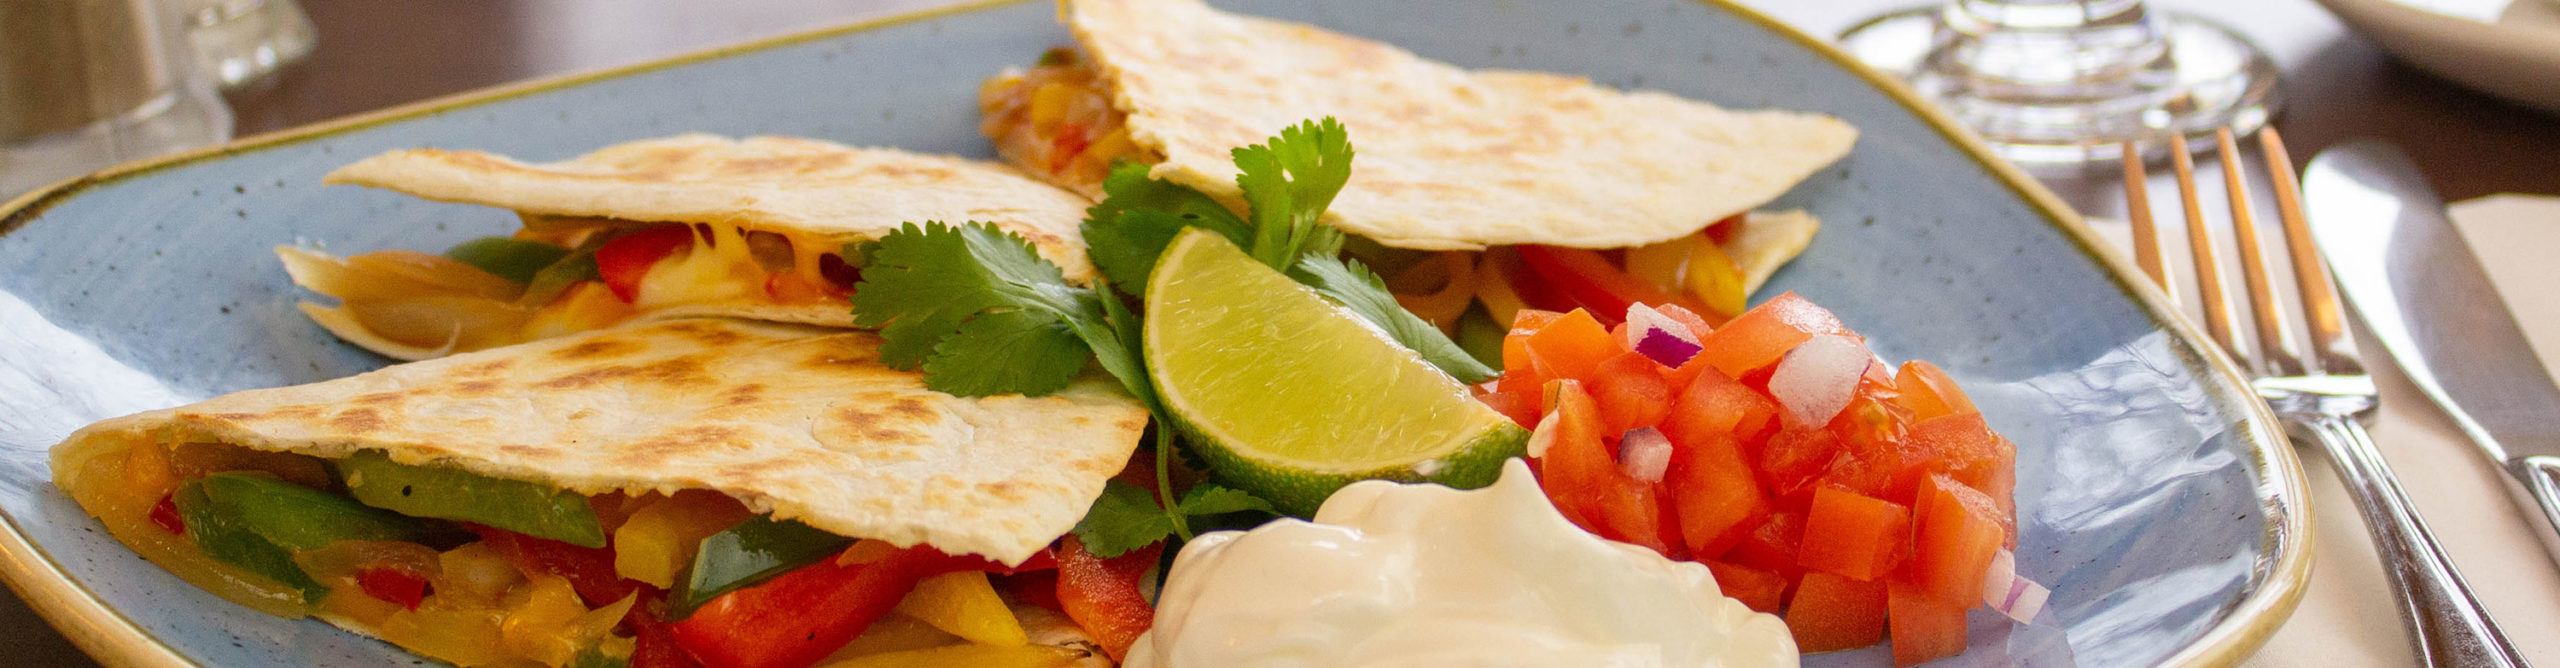 Grilled Veggie Quesadilla with Homemade Salsa